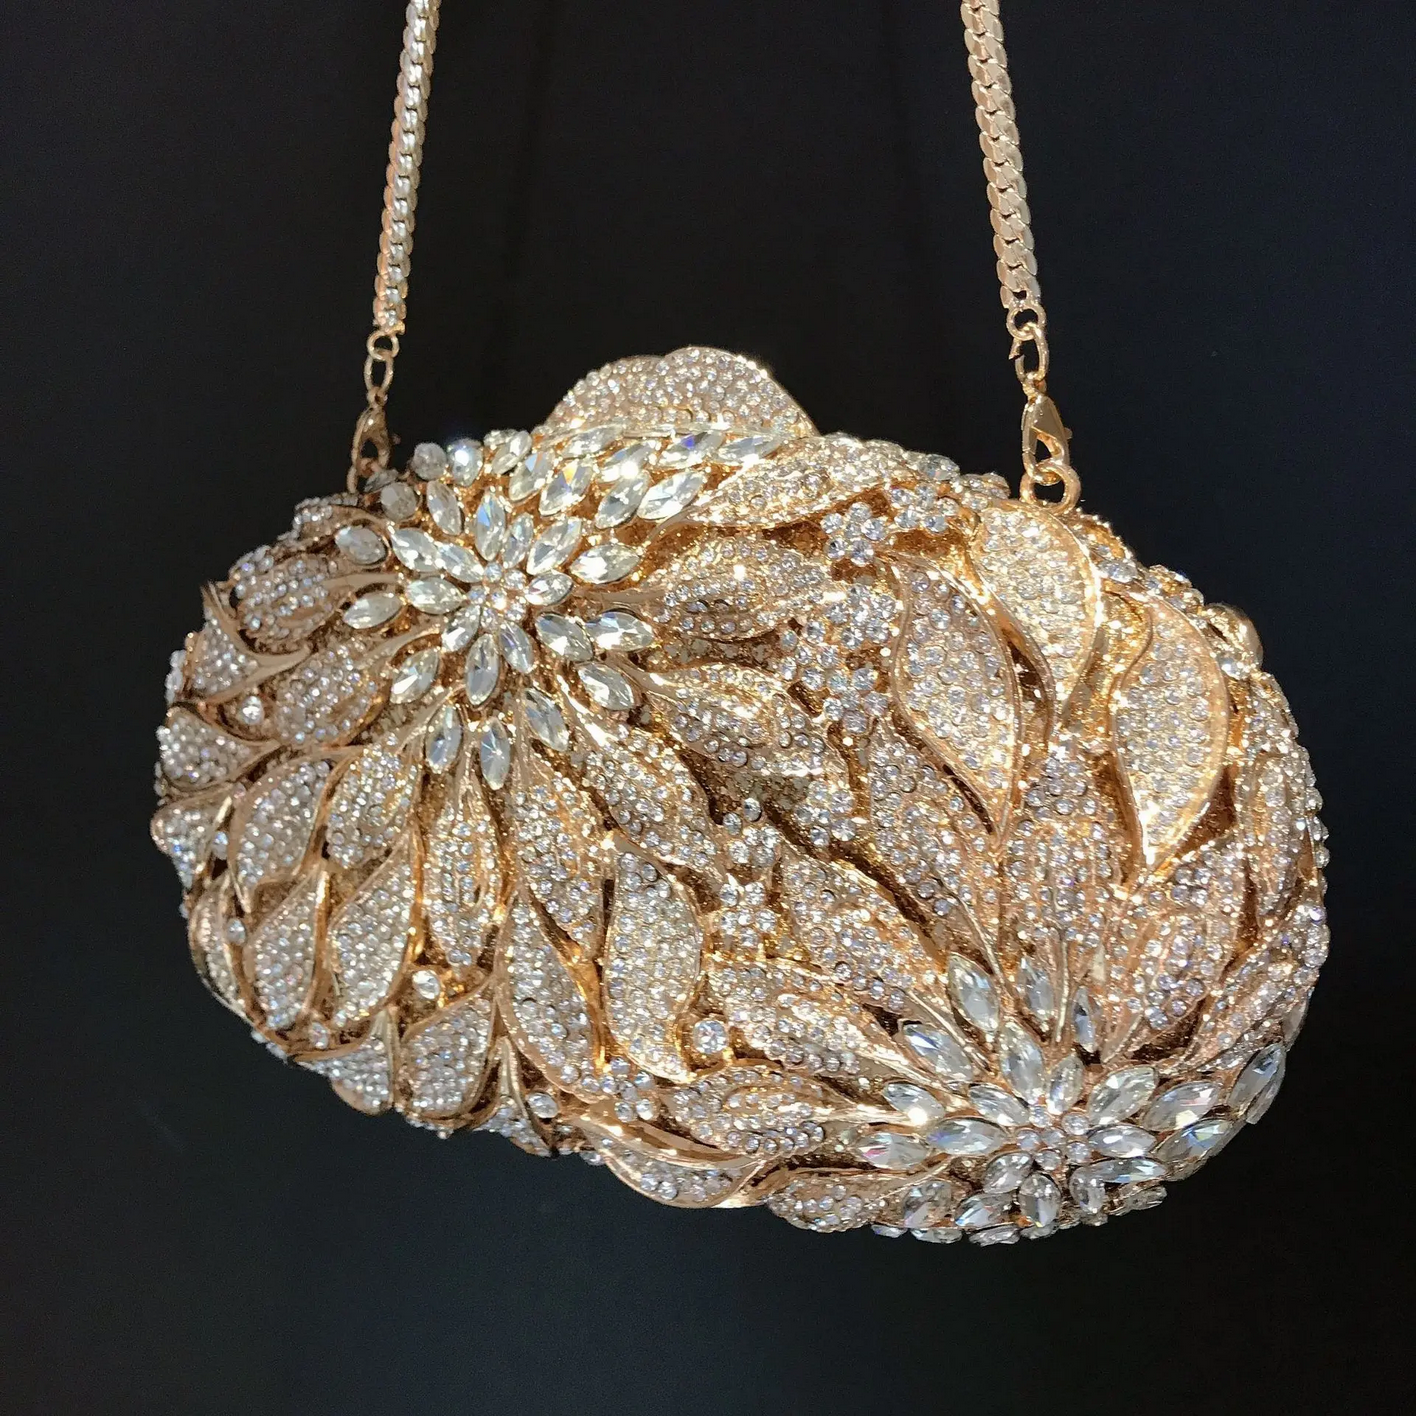 Gold Metal Leaves White Crystals Evening Clutch Bags